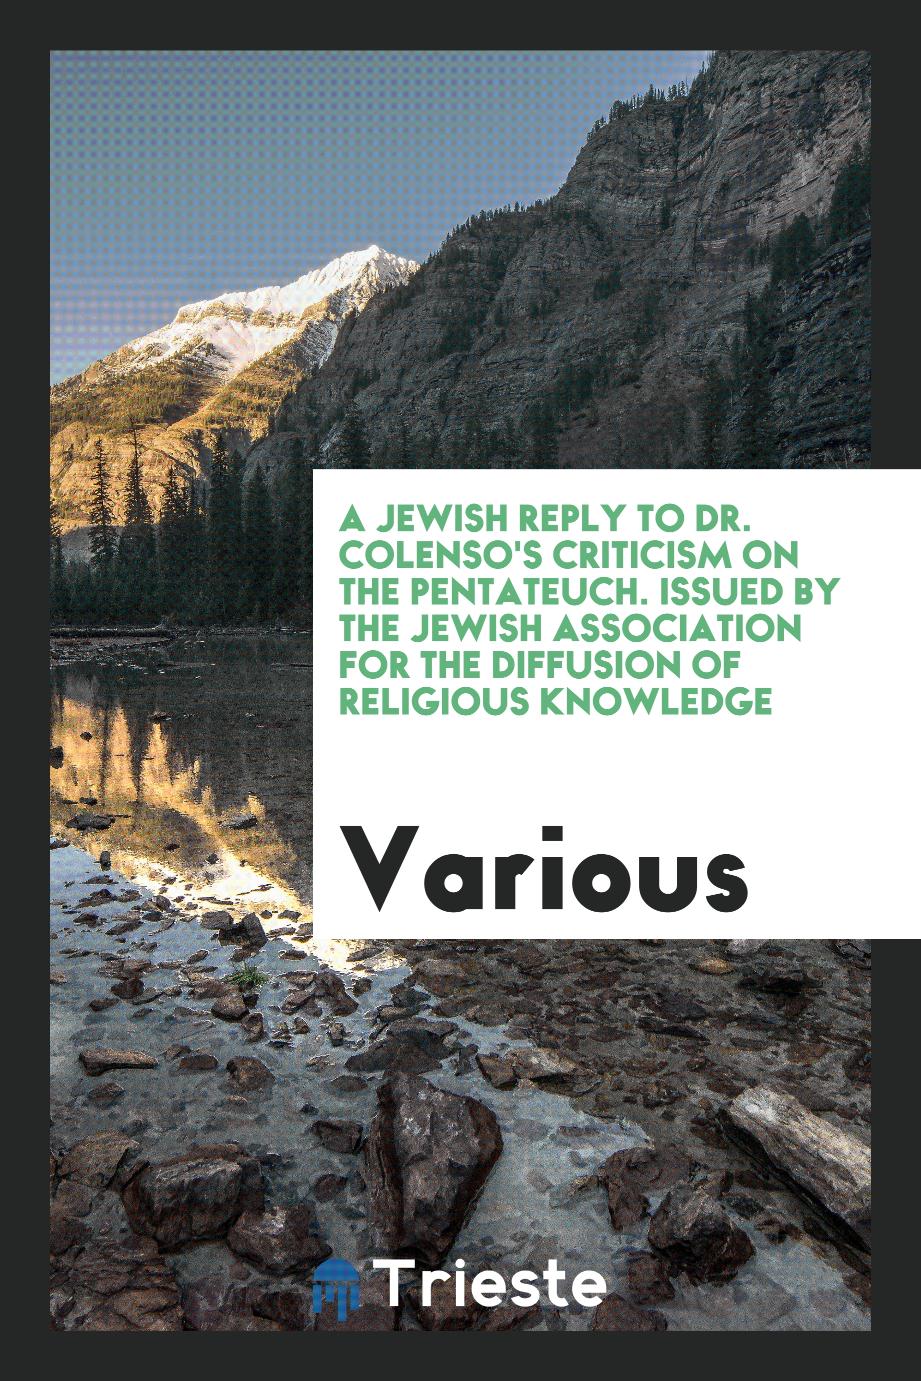 A Jewish Reply to Dr. Colenso's Criticism on the Pentateuch. Issued by the Jewish Association for the Diffusion of Religious Knowledge